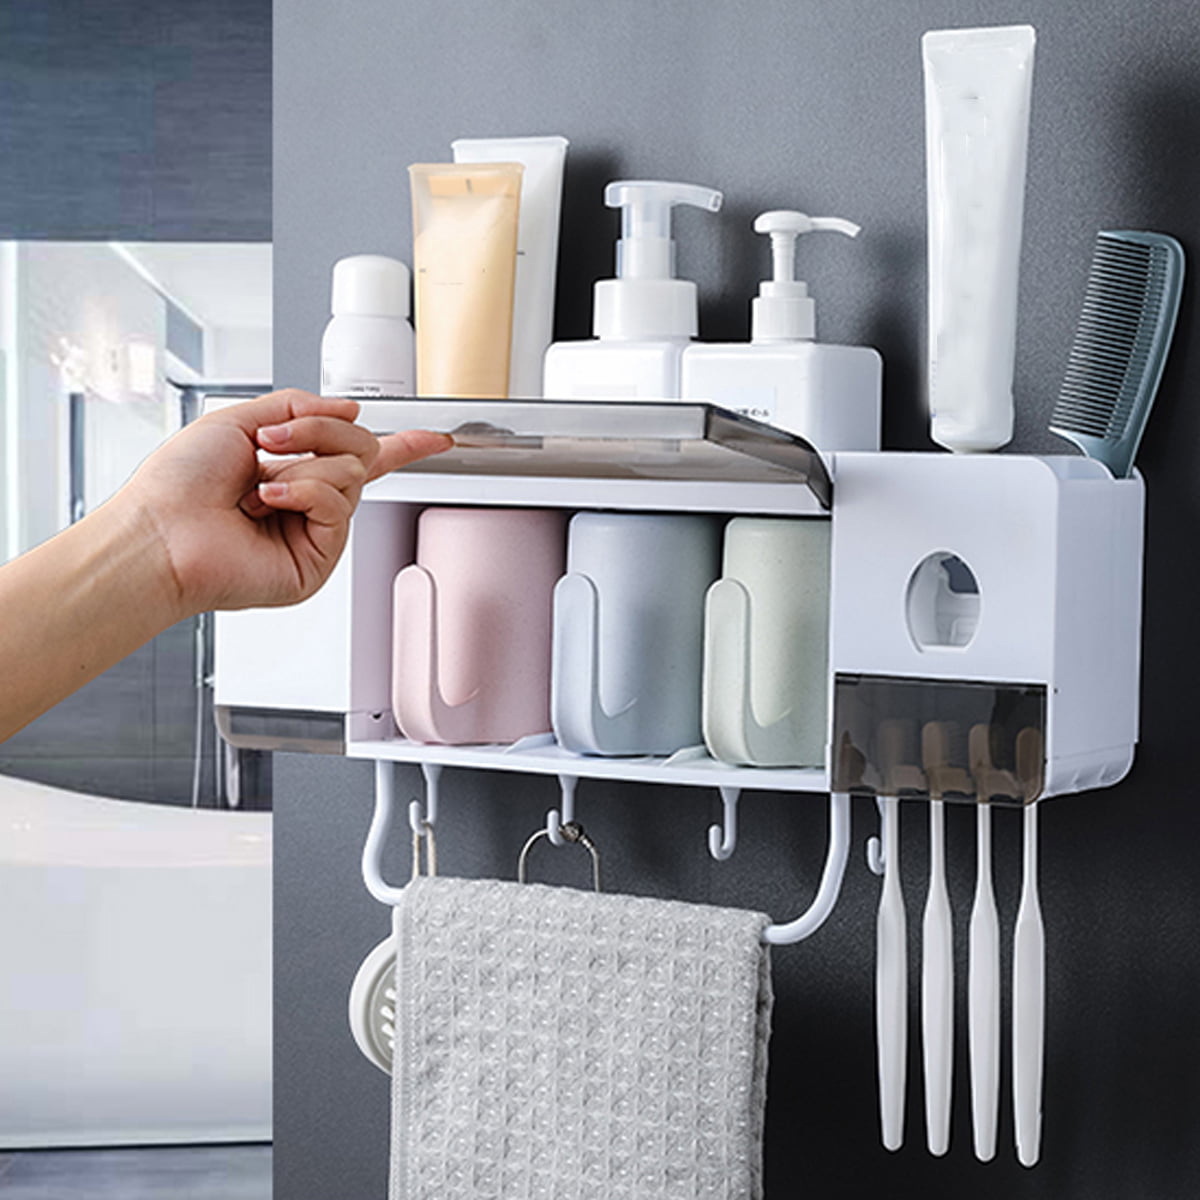 Details about   Automatic Wall Mount Toothpaste Dispenser Squeezer Bathroom Accessories Family 